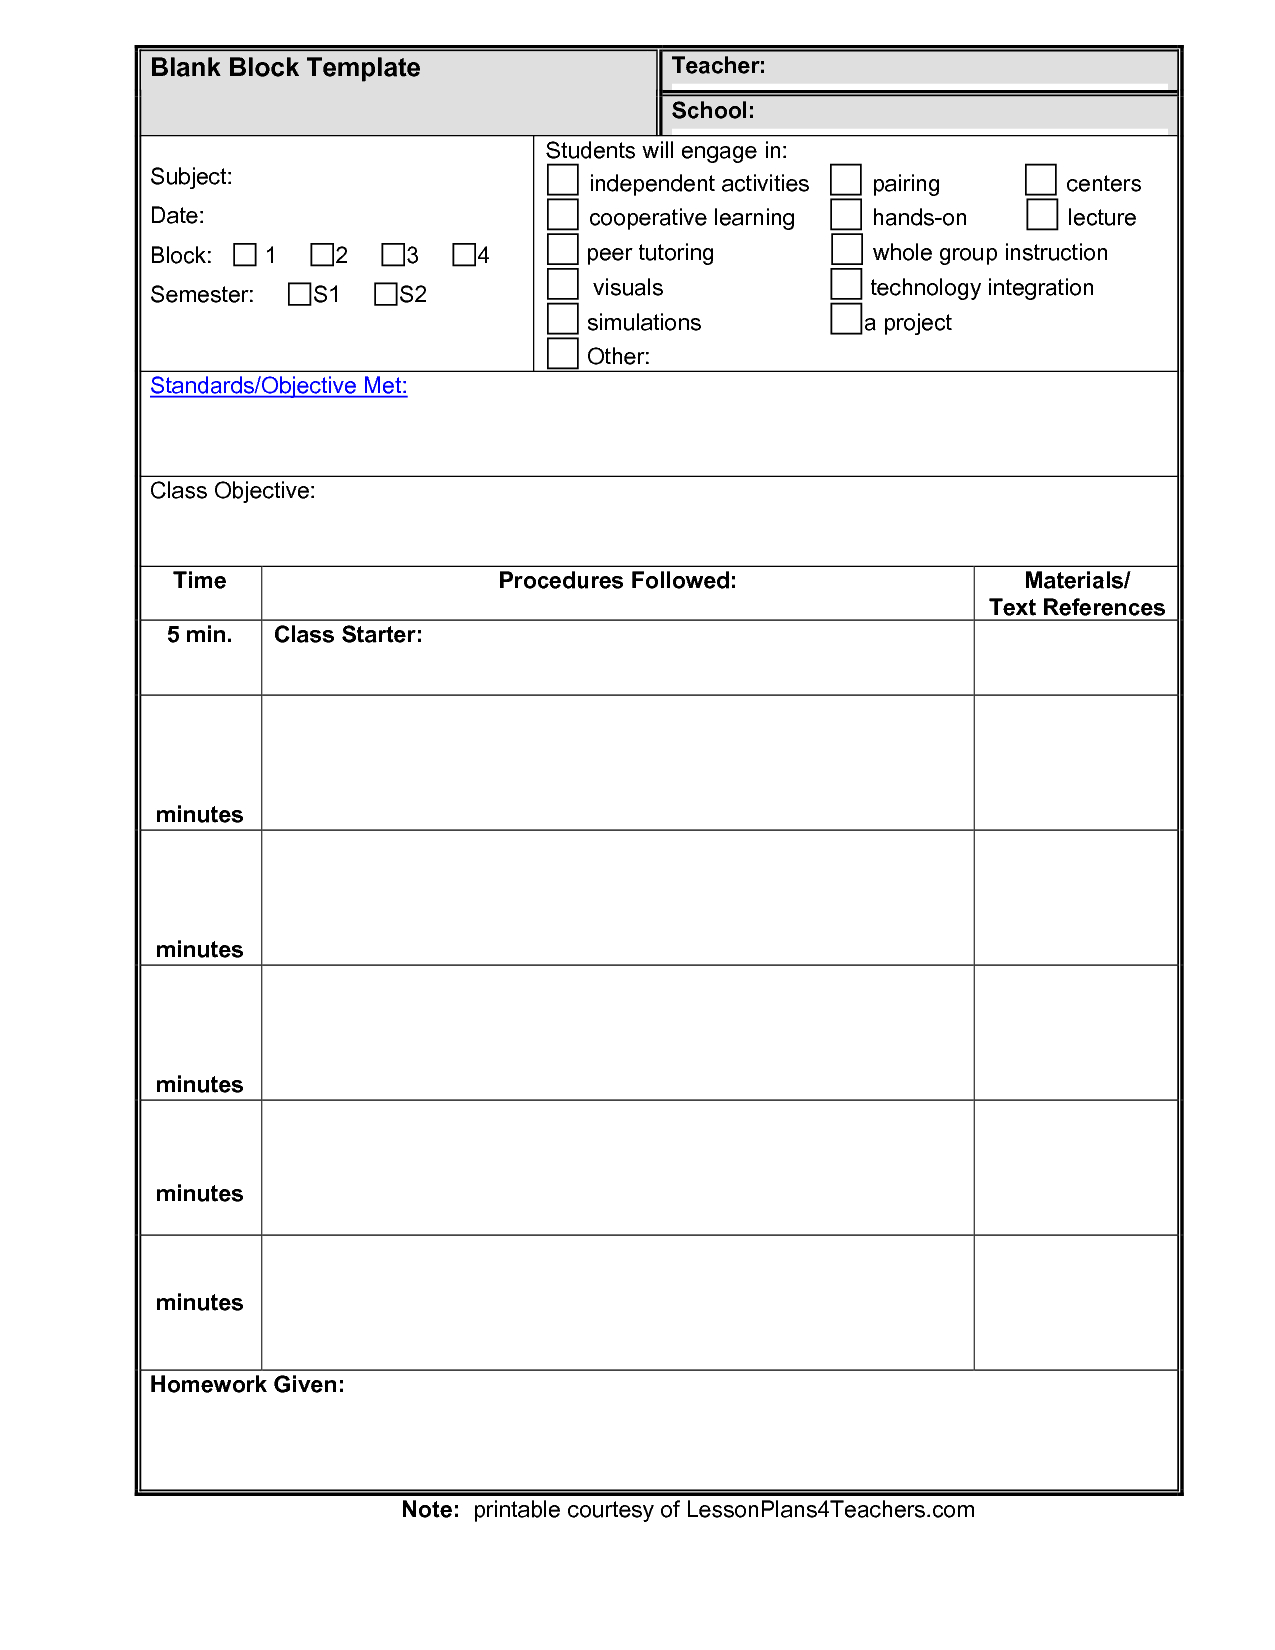 Free Blank Lesson Plan Templates Best Business Template Qw9Zdlcx - Free Printable Blank Lesson Plan Pages